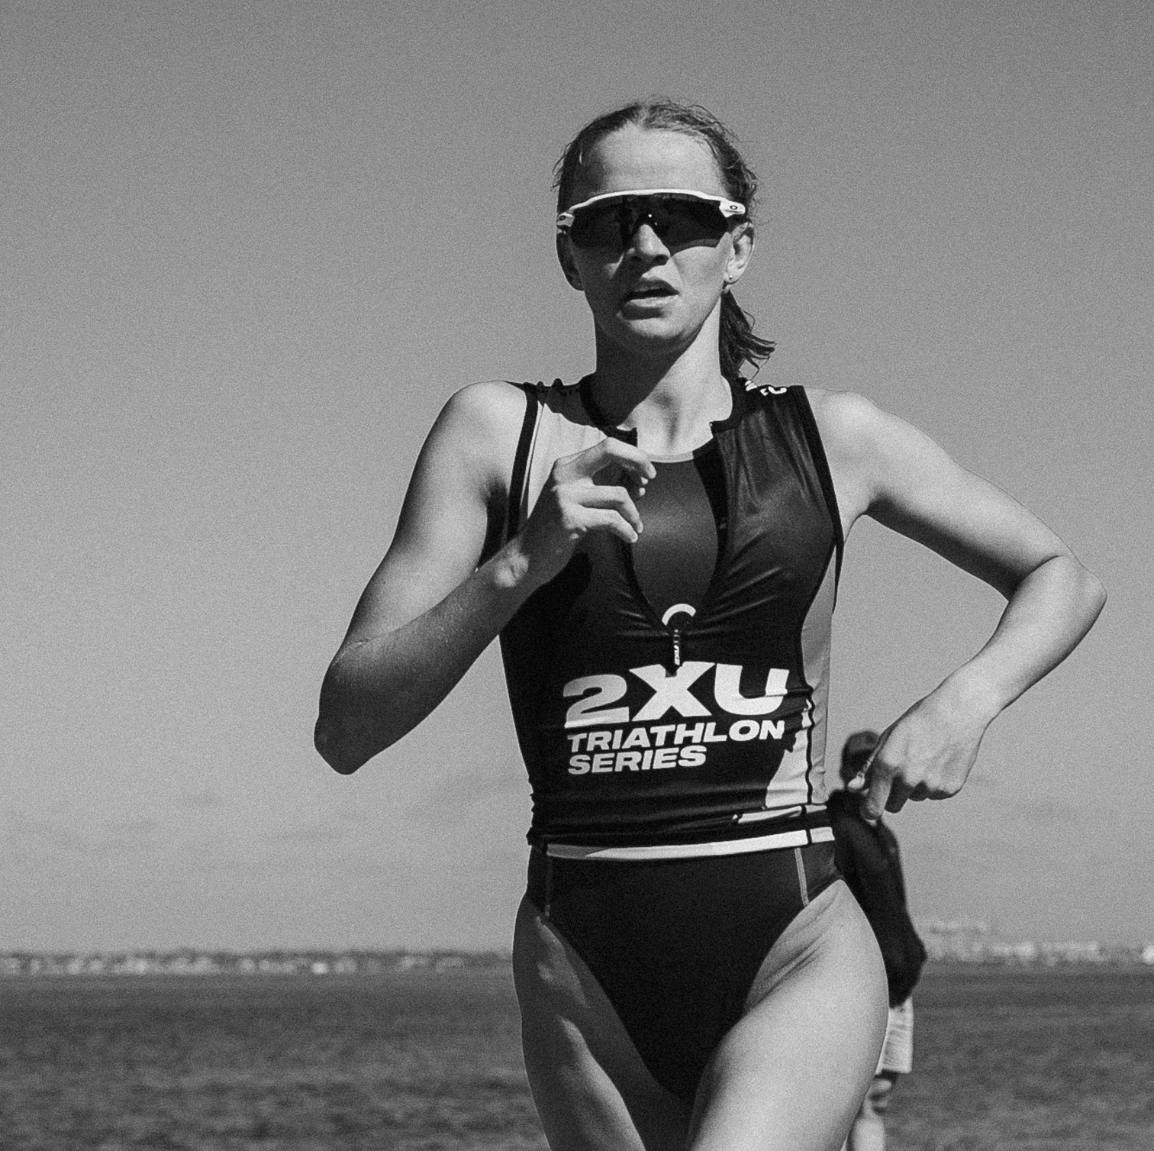 TriShop launches a major partnership with the 2XU Triathlon Series Races